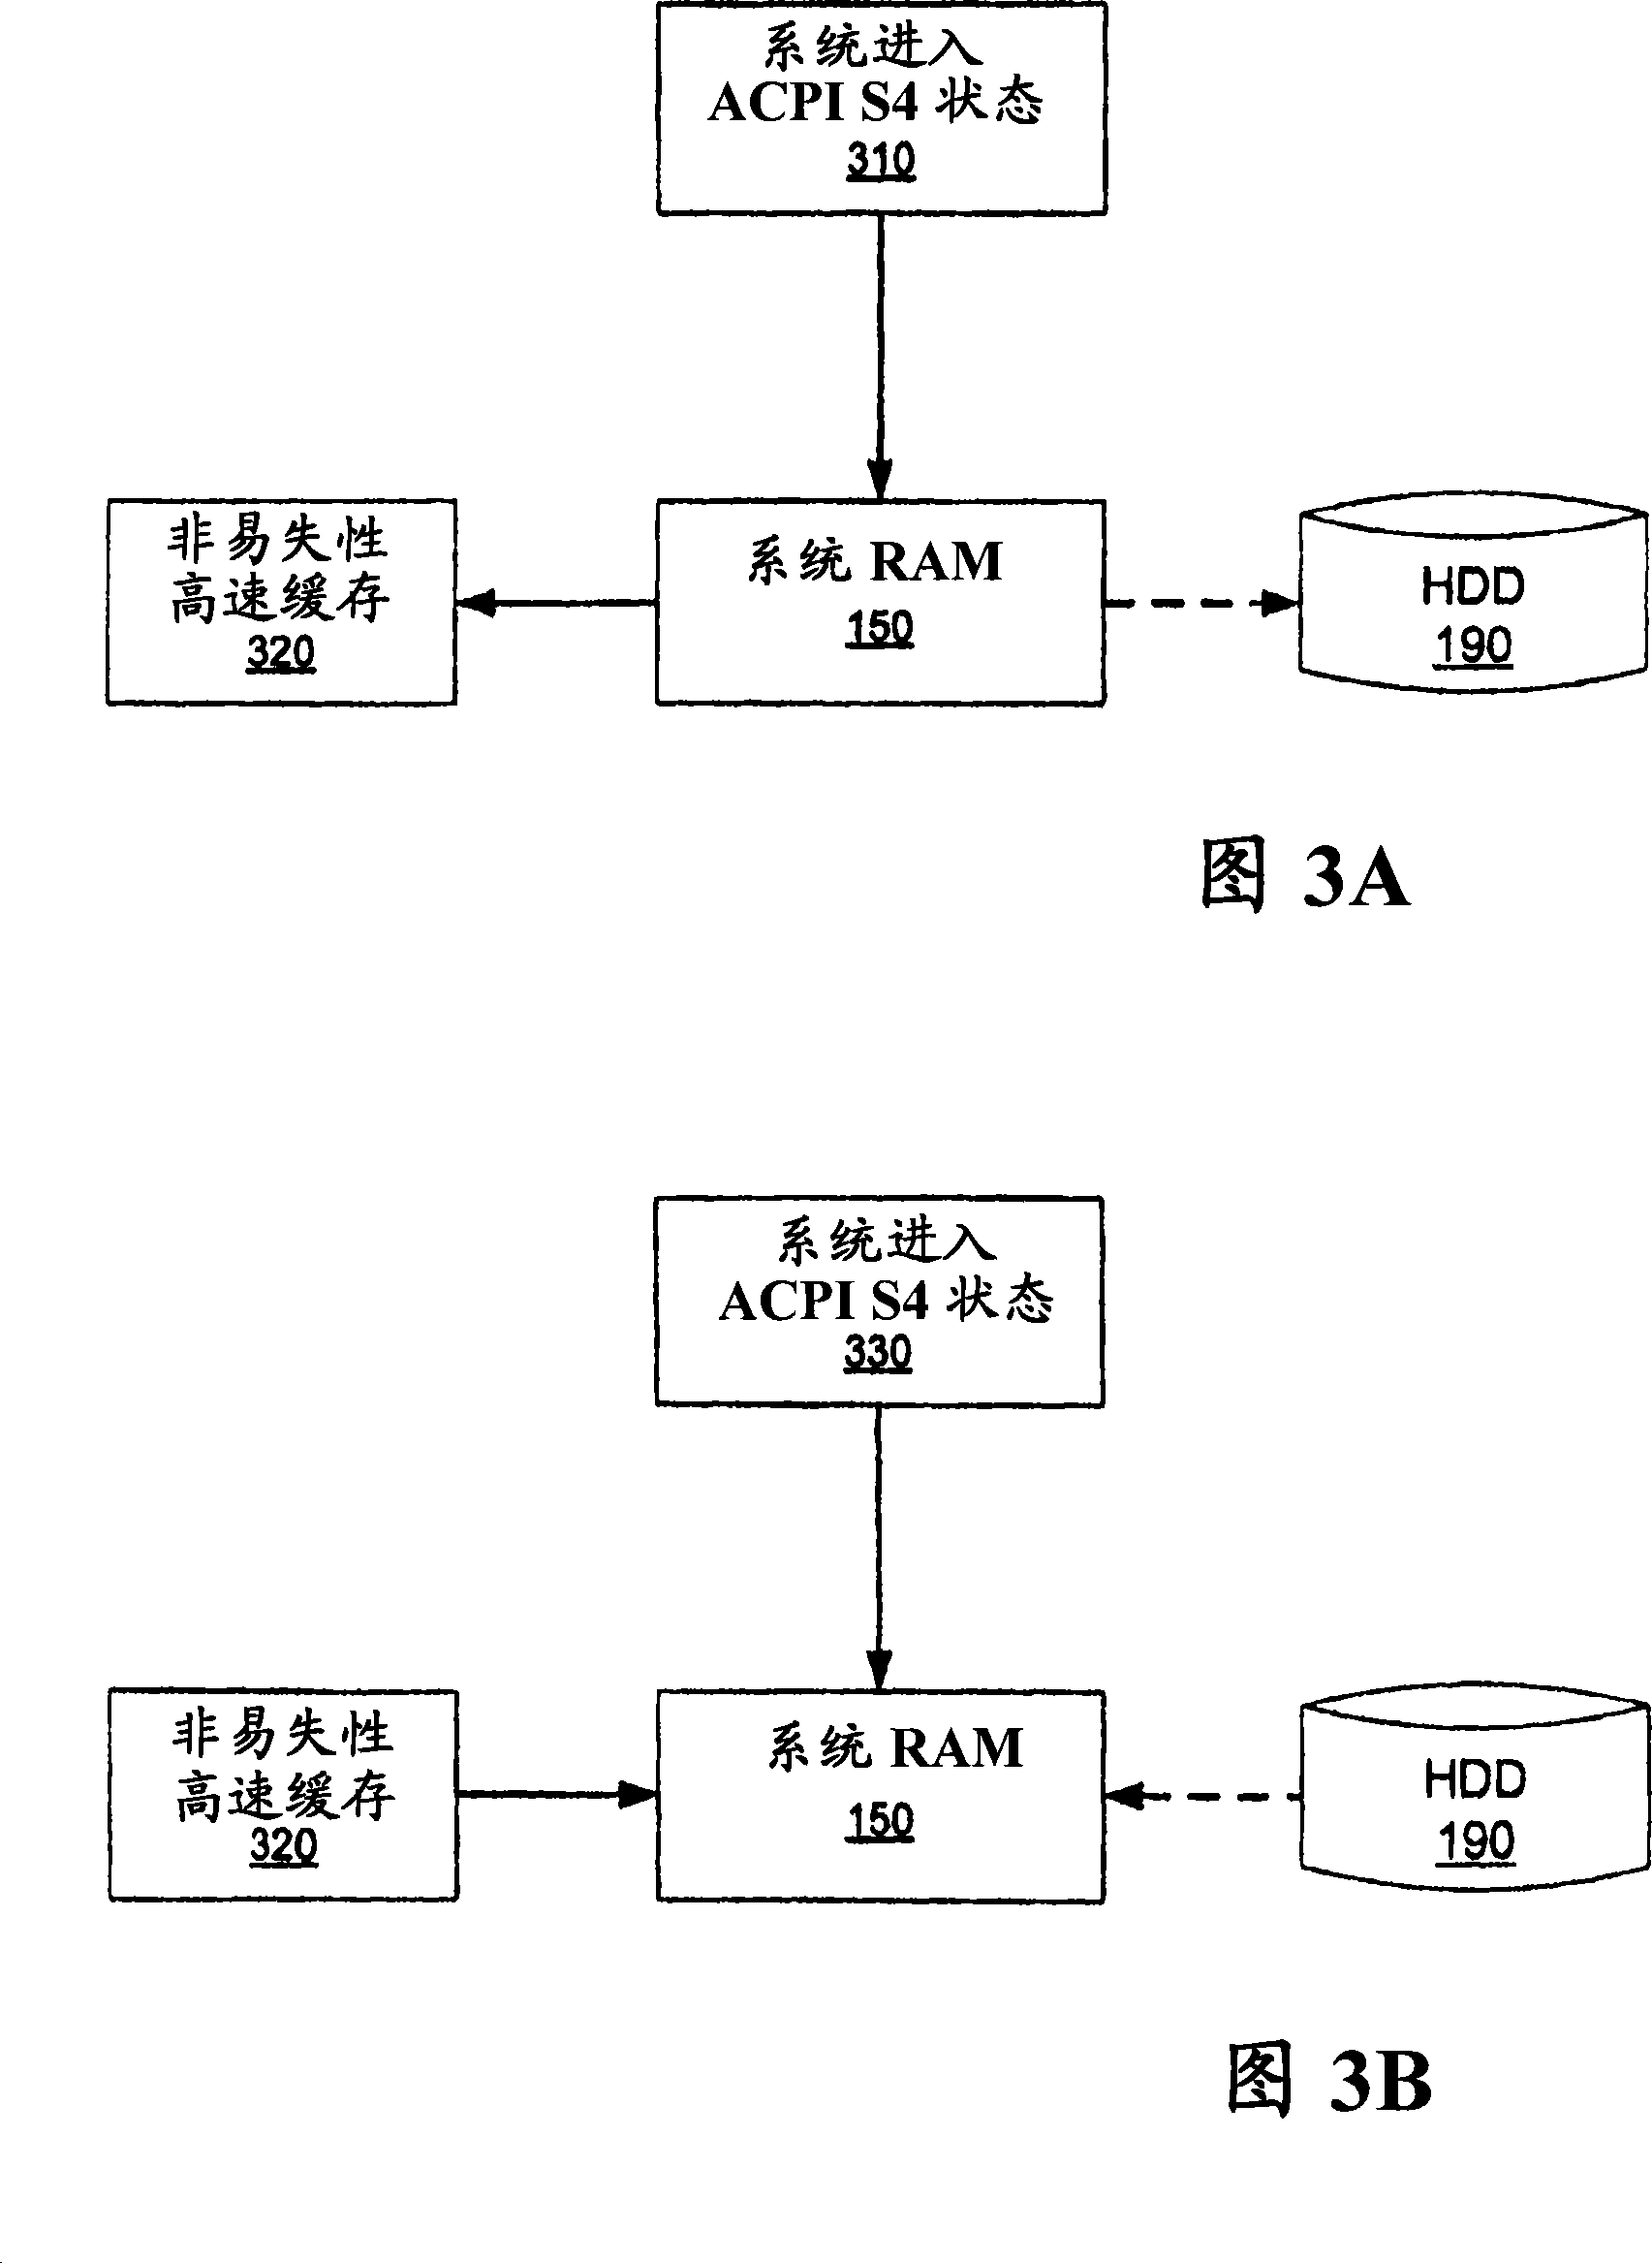 Method and apparatus for saving power for a computing system by providing instant-on resuming from a hibernation state